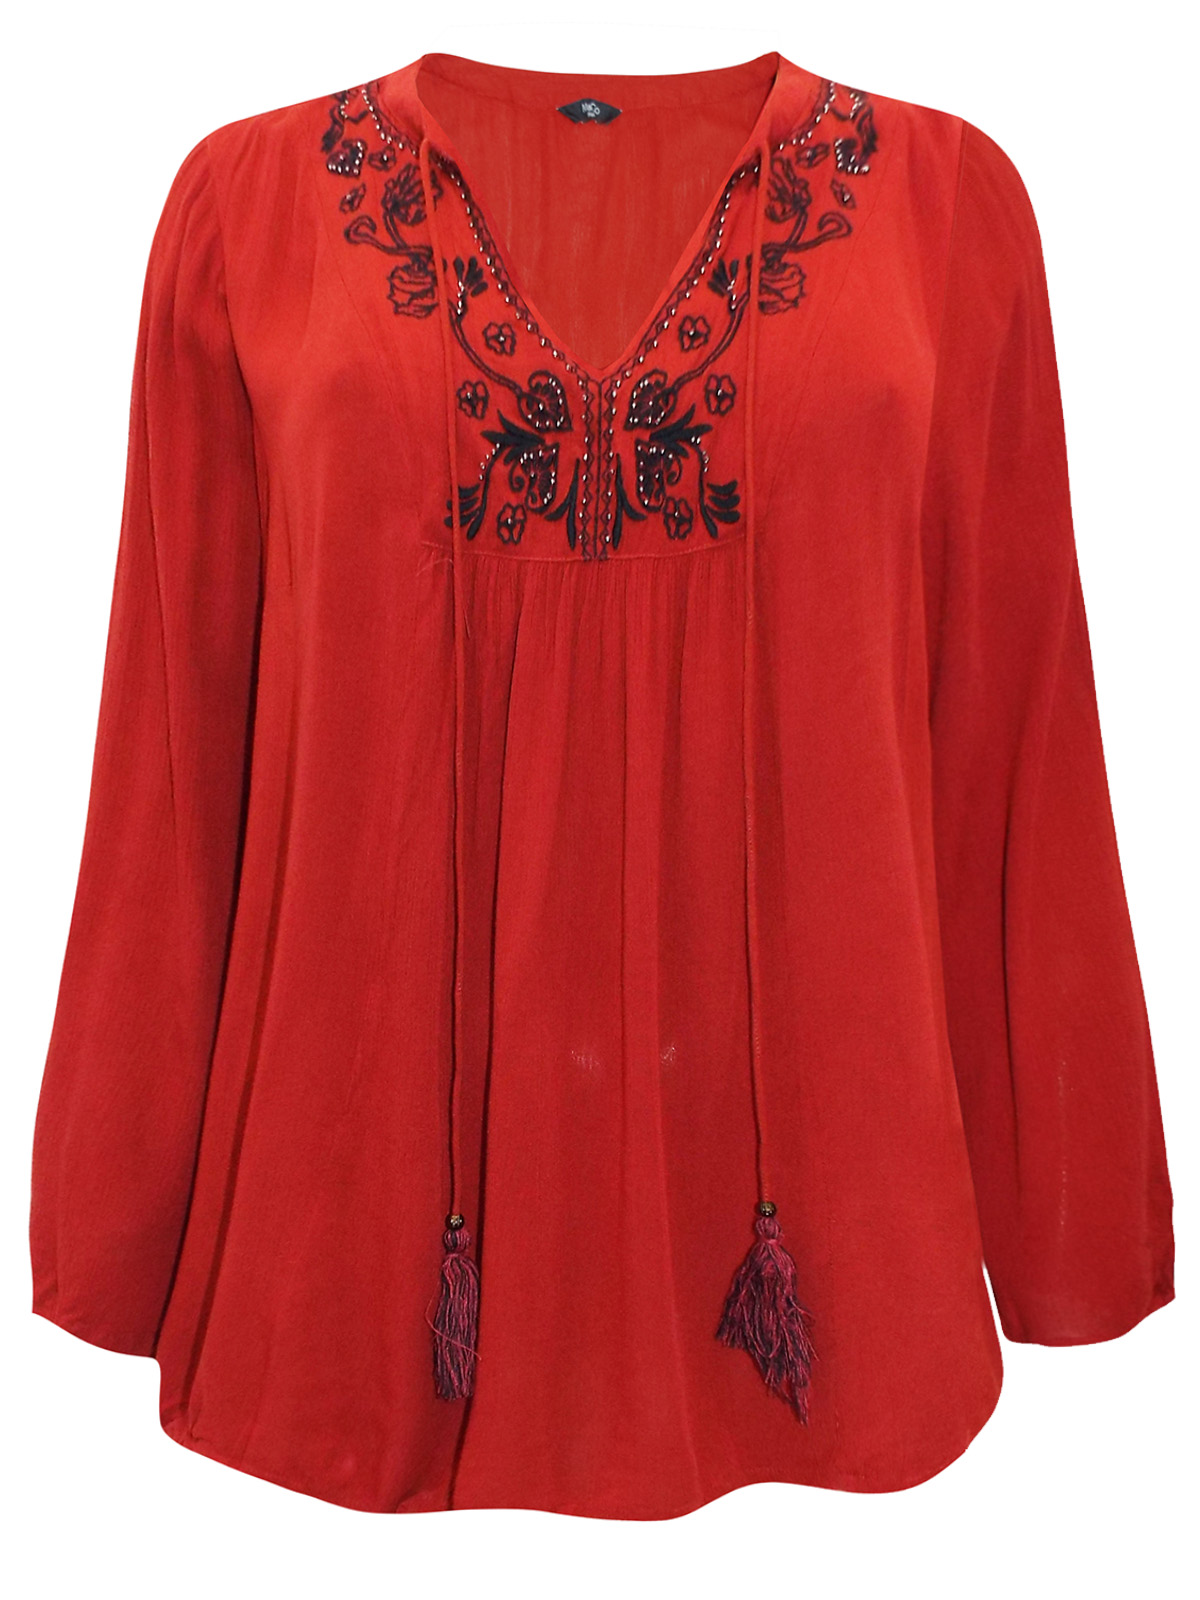 M&Co - - M&Co RUST Embroidered Tassel Top - Plus Size 18 to 28